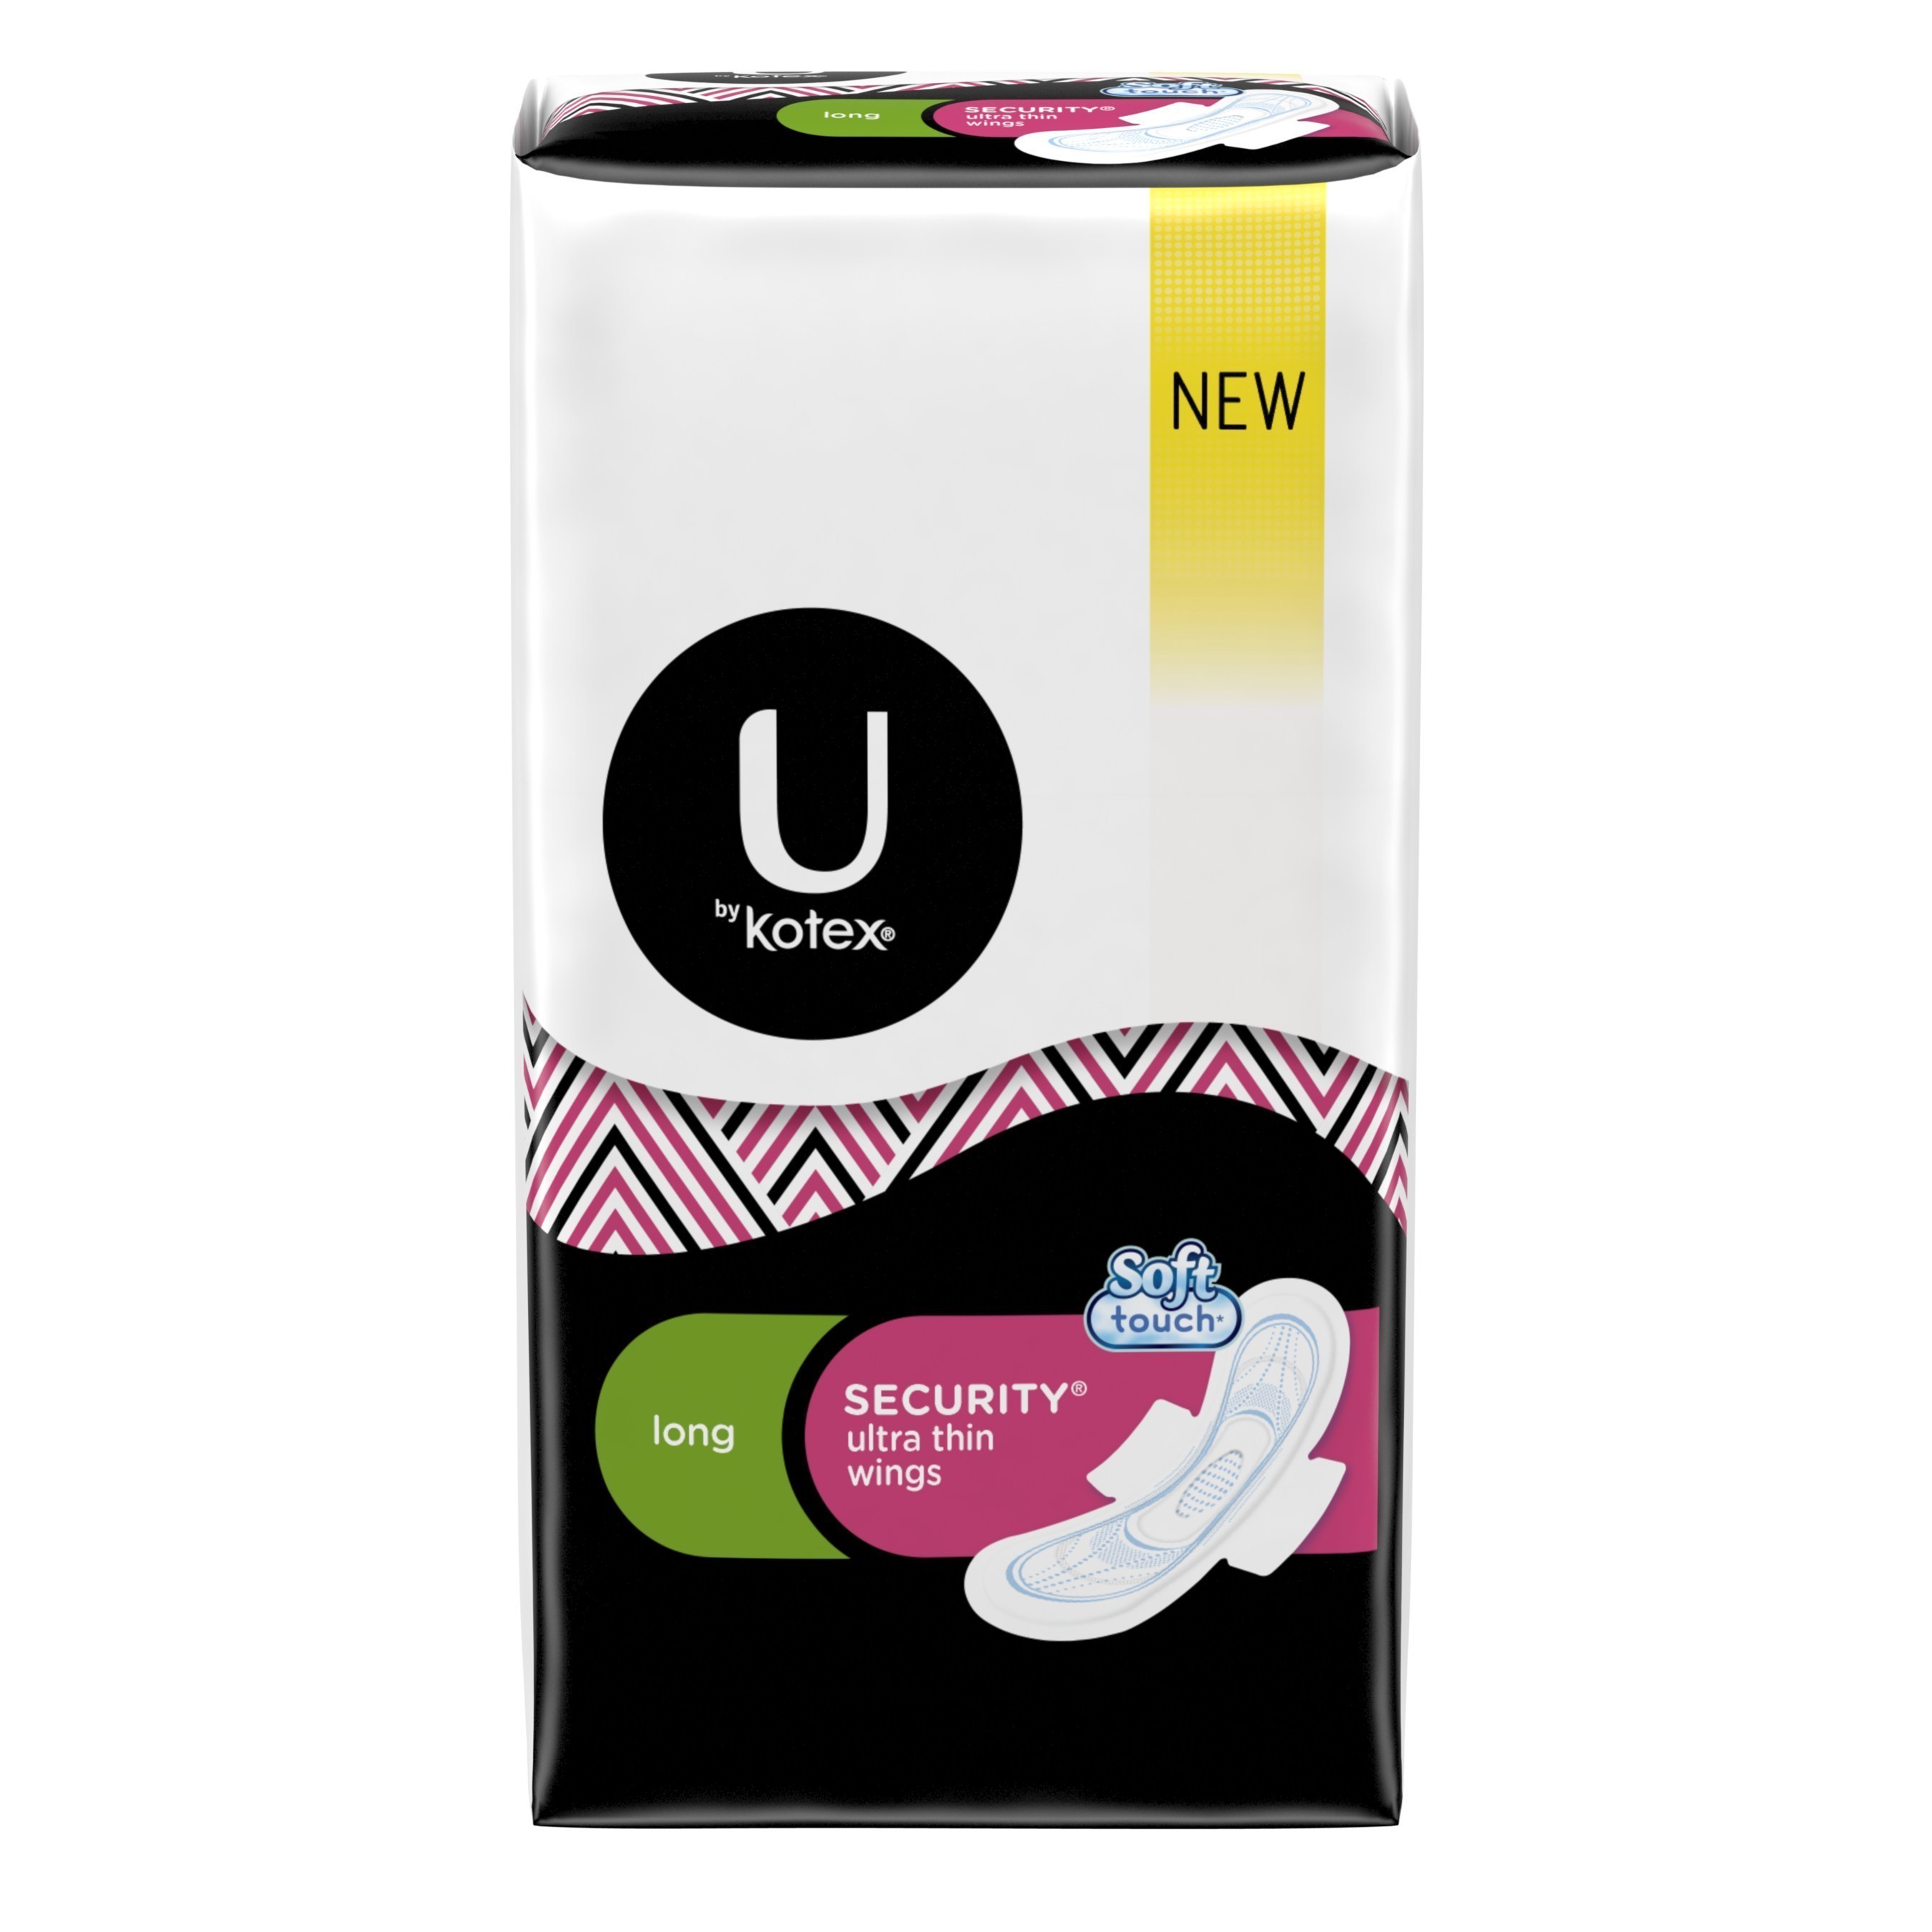 U by Kotex Security Ultra Thin Long Pads With Wings